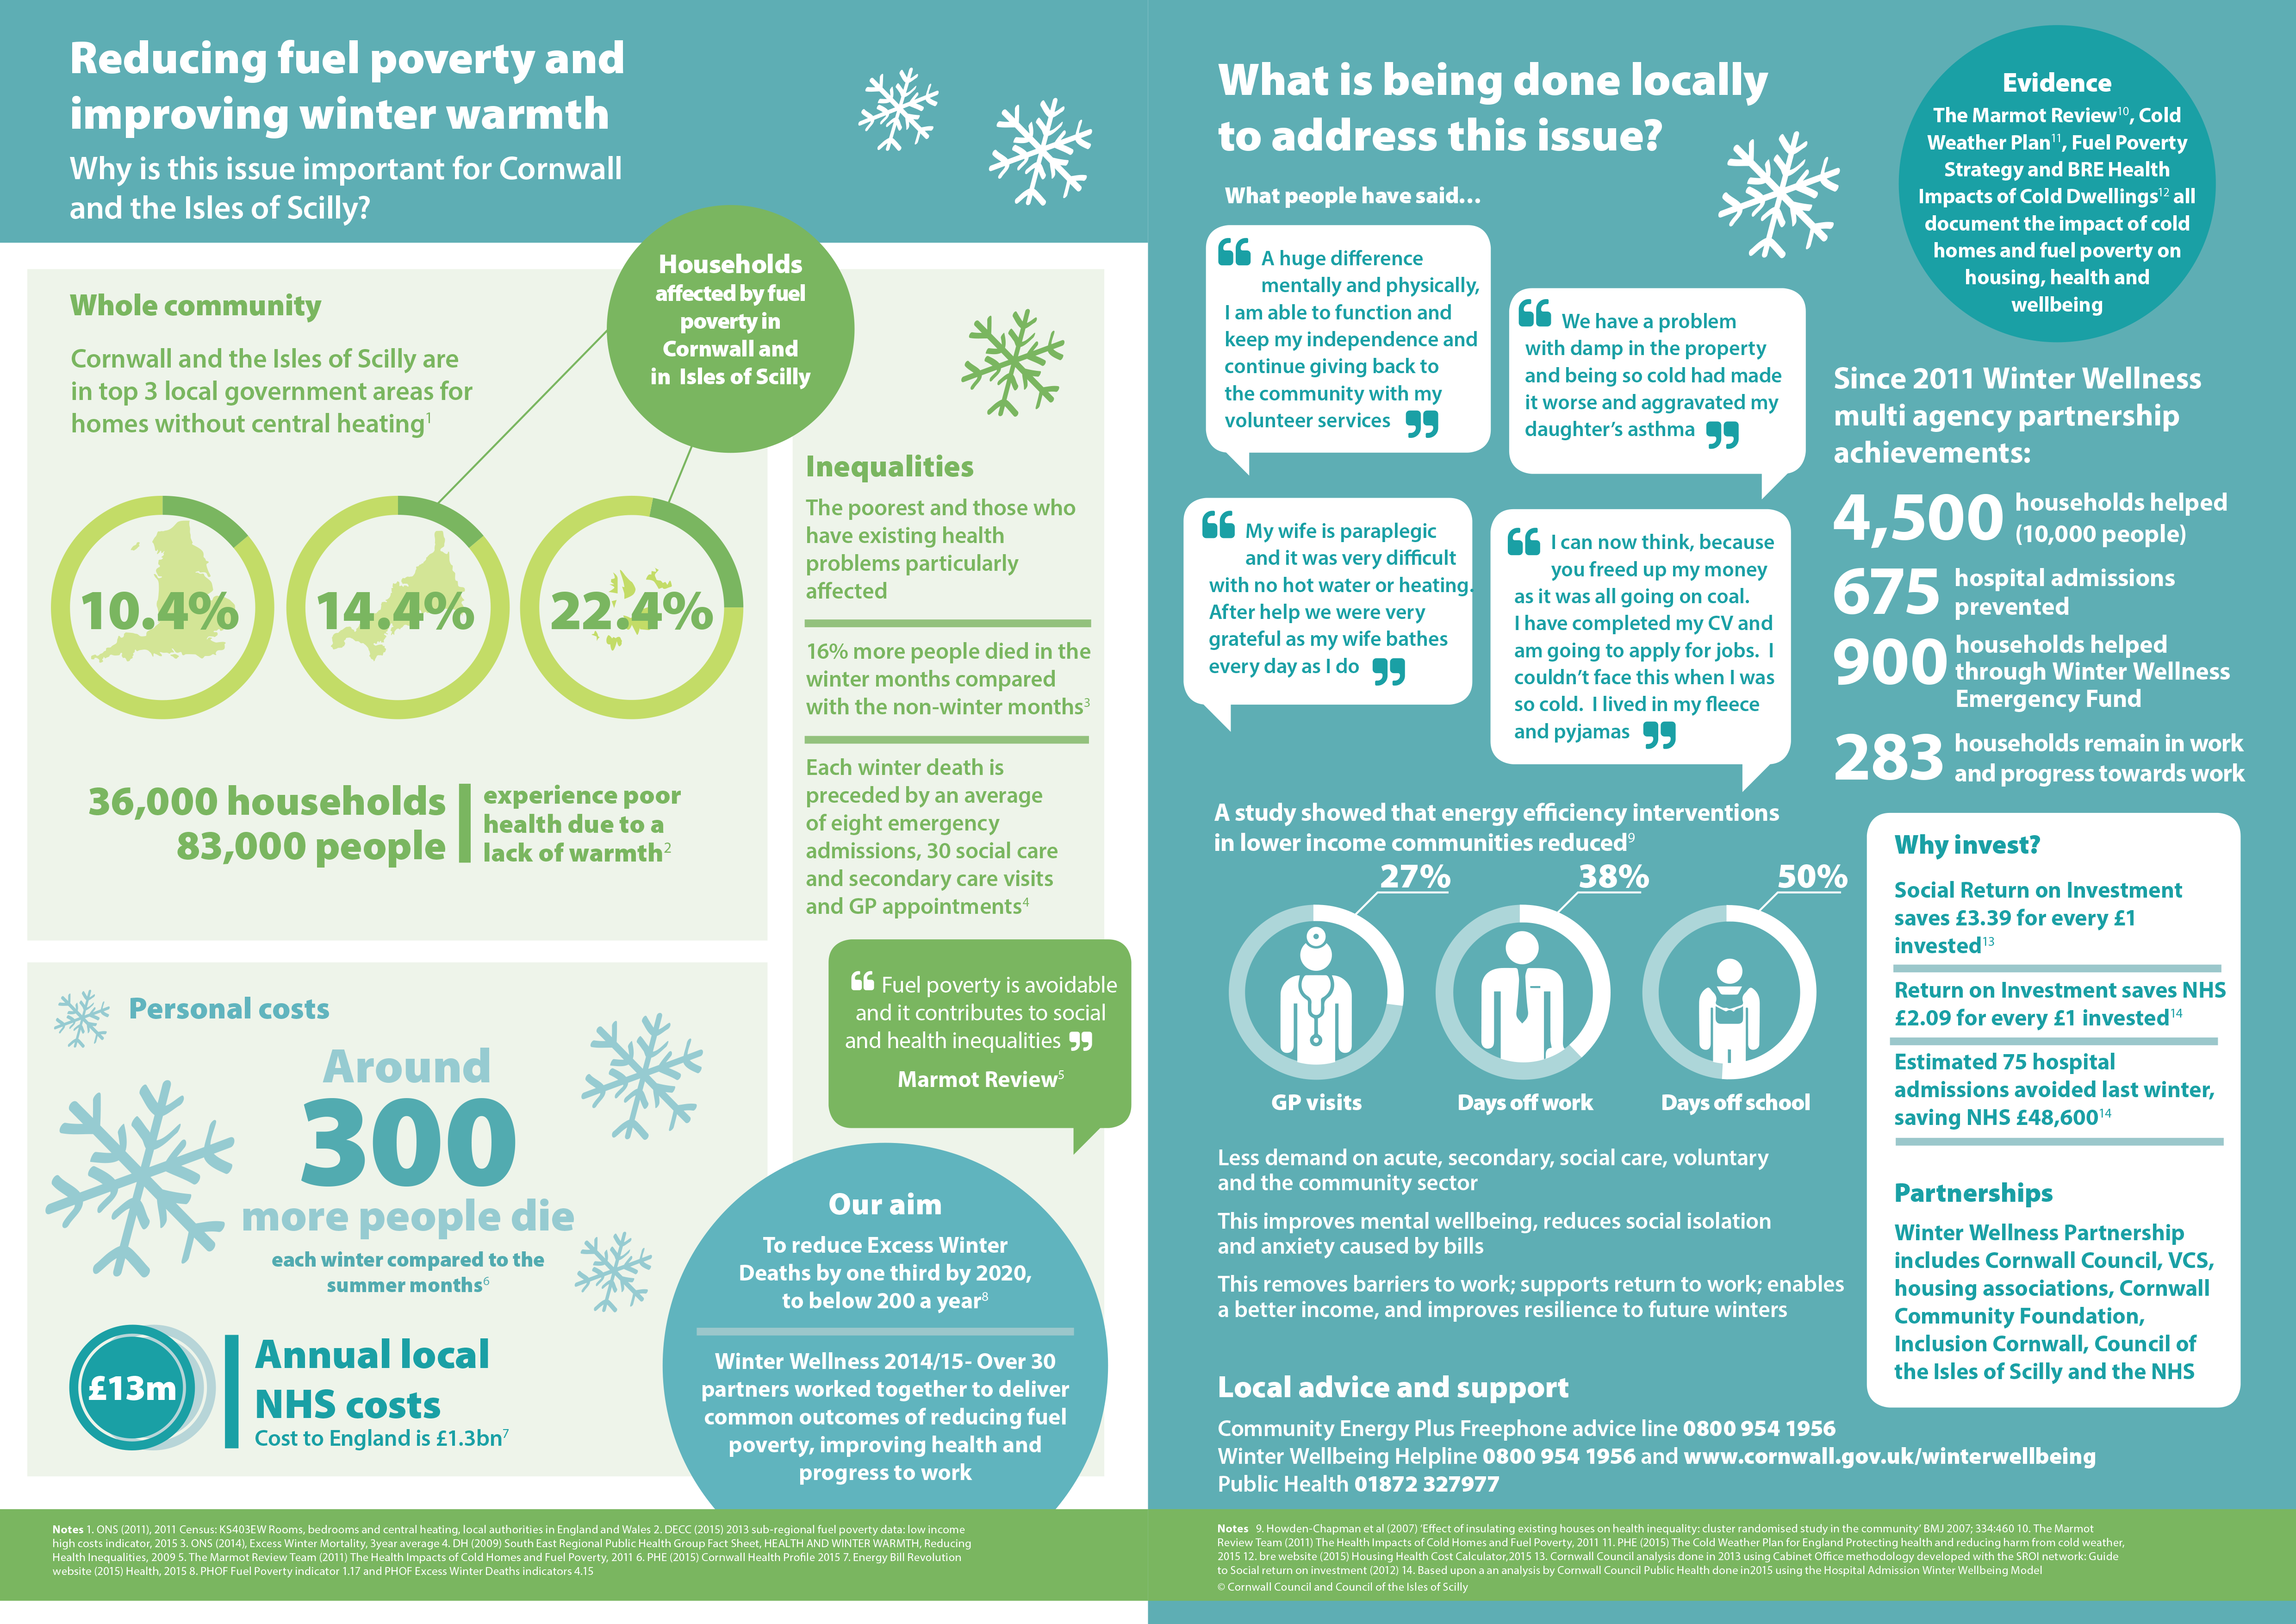 The Energy Company Obligation (ECO) is a government energy efficiency scheme in Great Britain to tackle fuel poverty and help reduce carbon emissions.